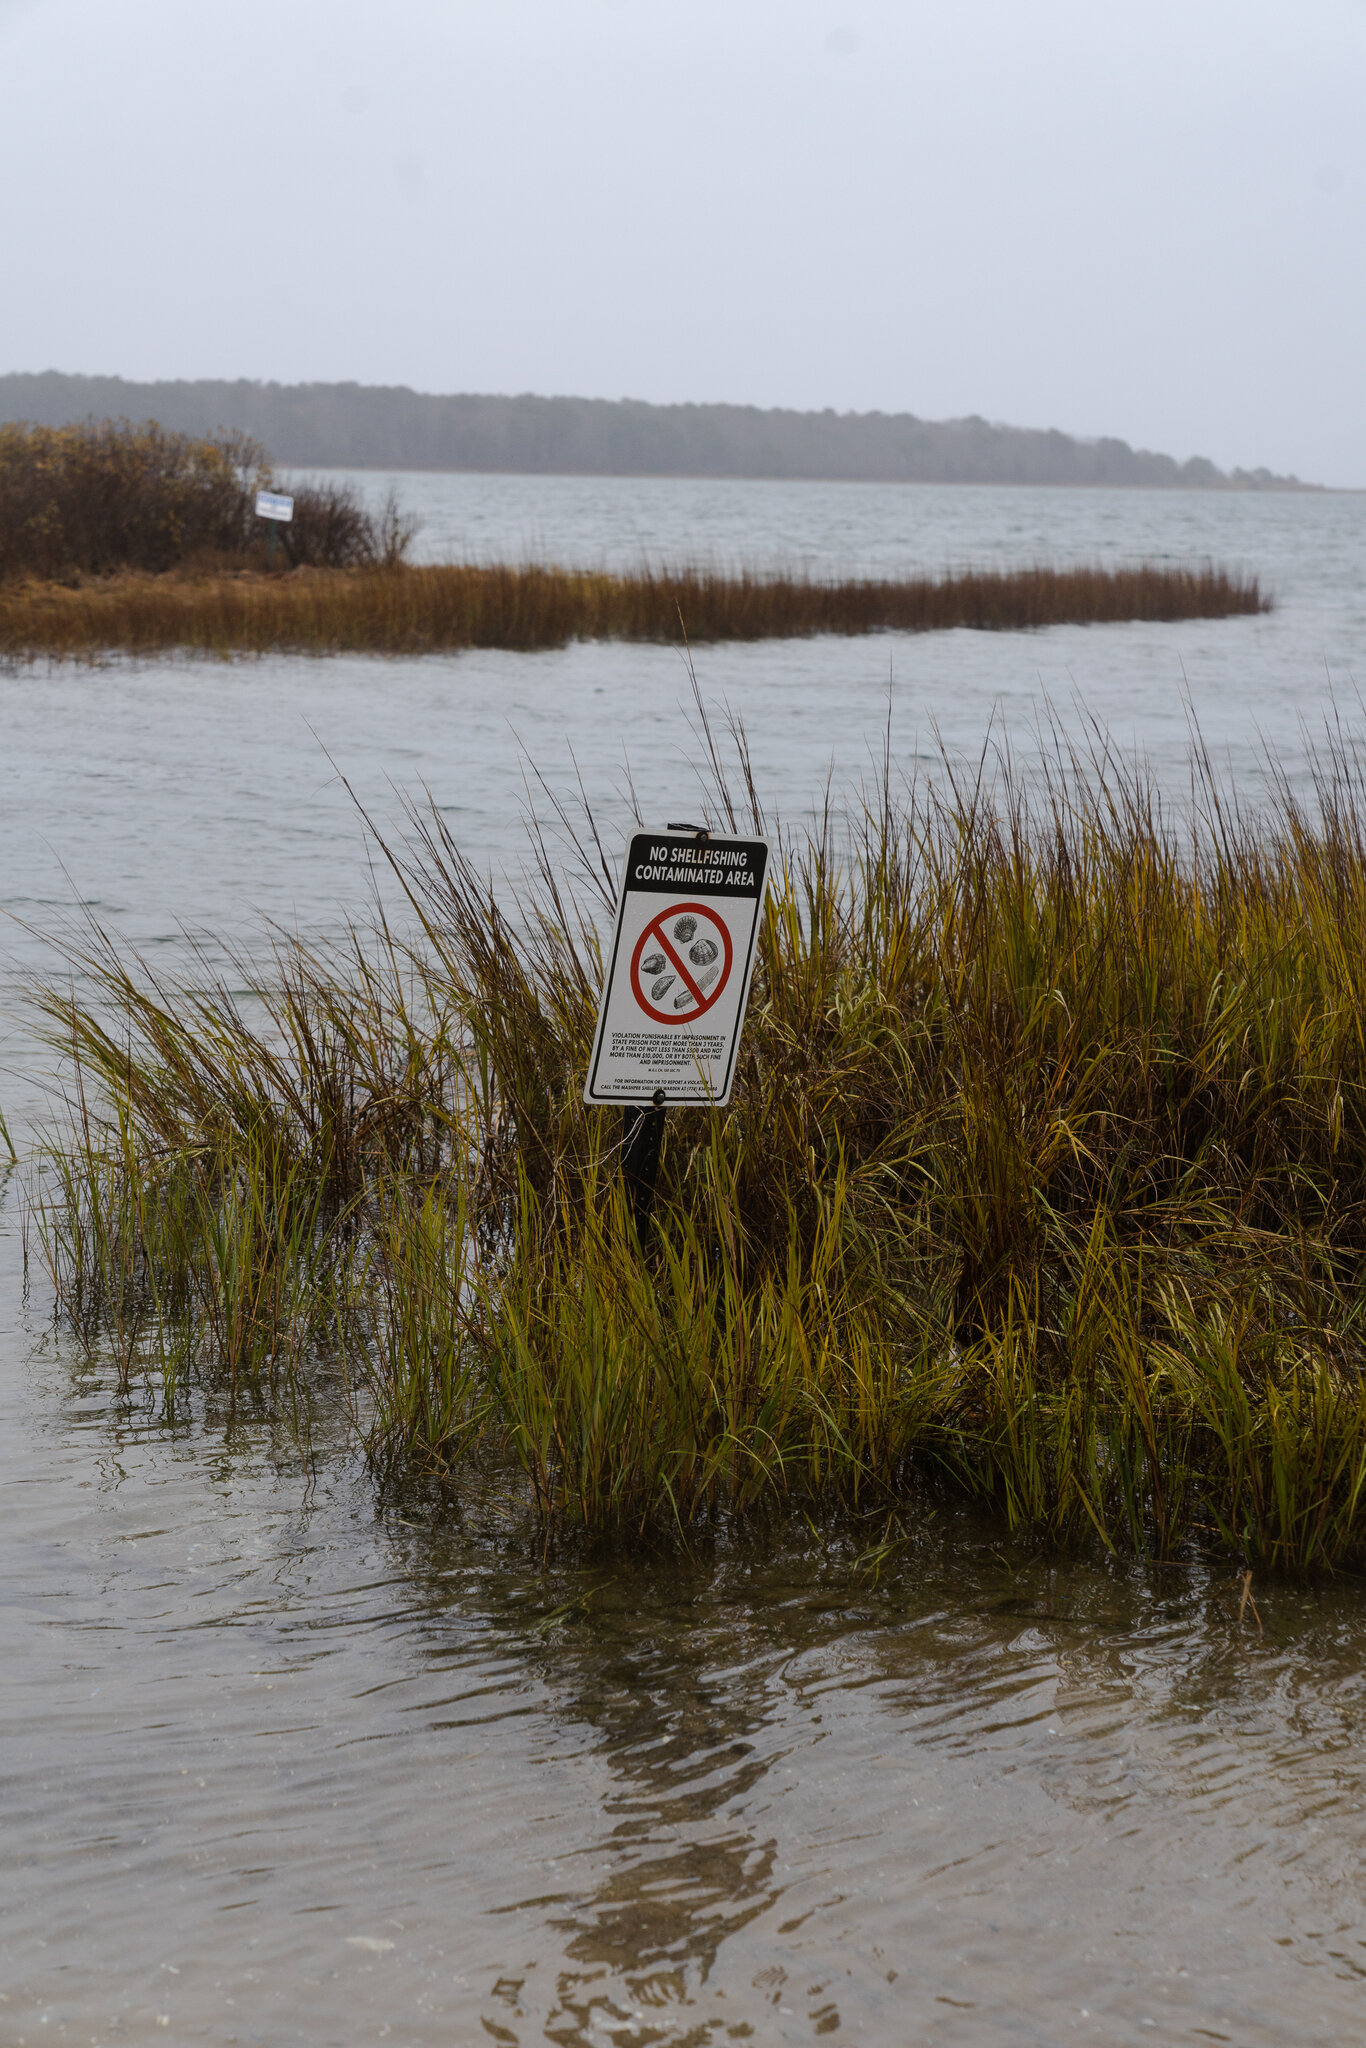 A sign at Punkhorn Pointin in Mashpee, Massachusetts prohibits shellfishing due to toxic algae blooms caused by sewage pollution. Photo: Sophie Park / The New York Times